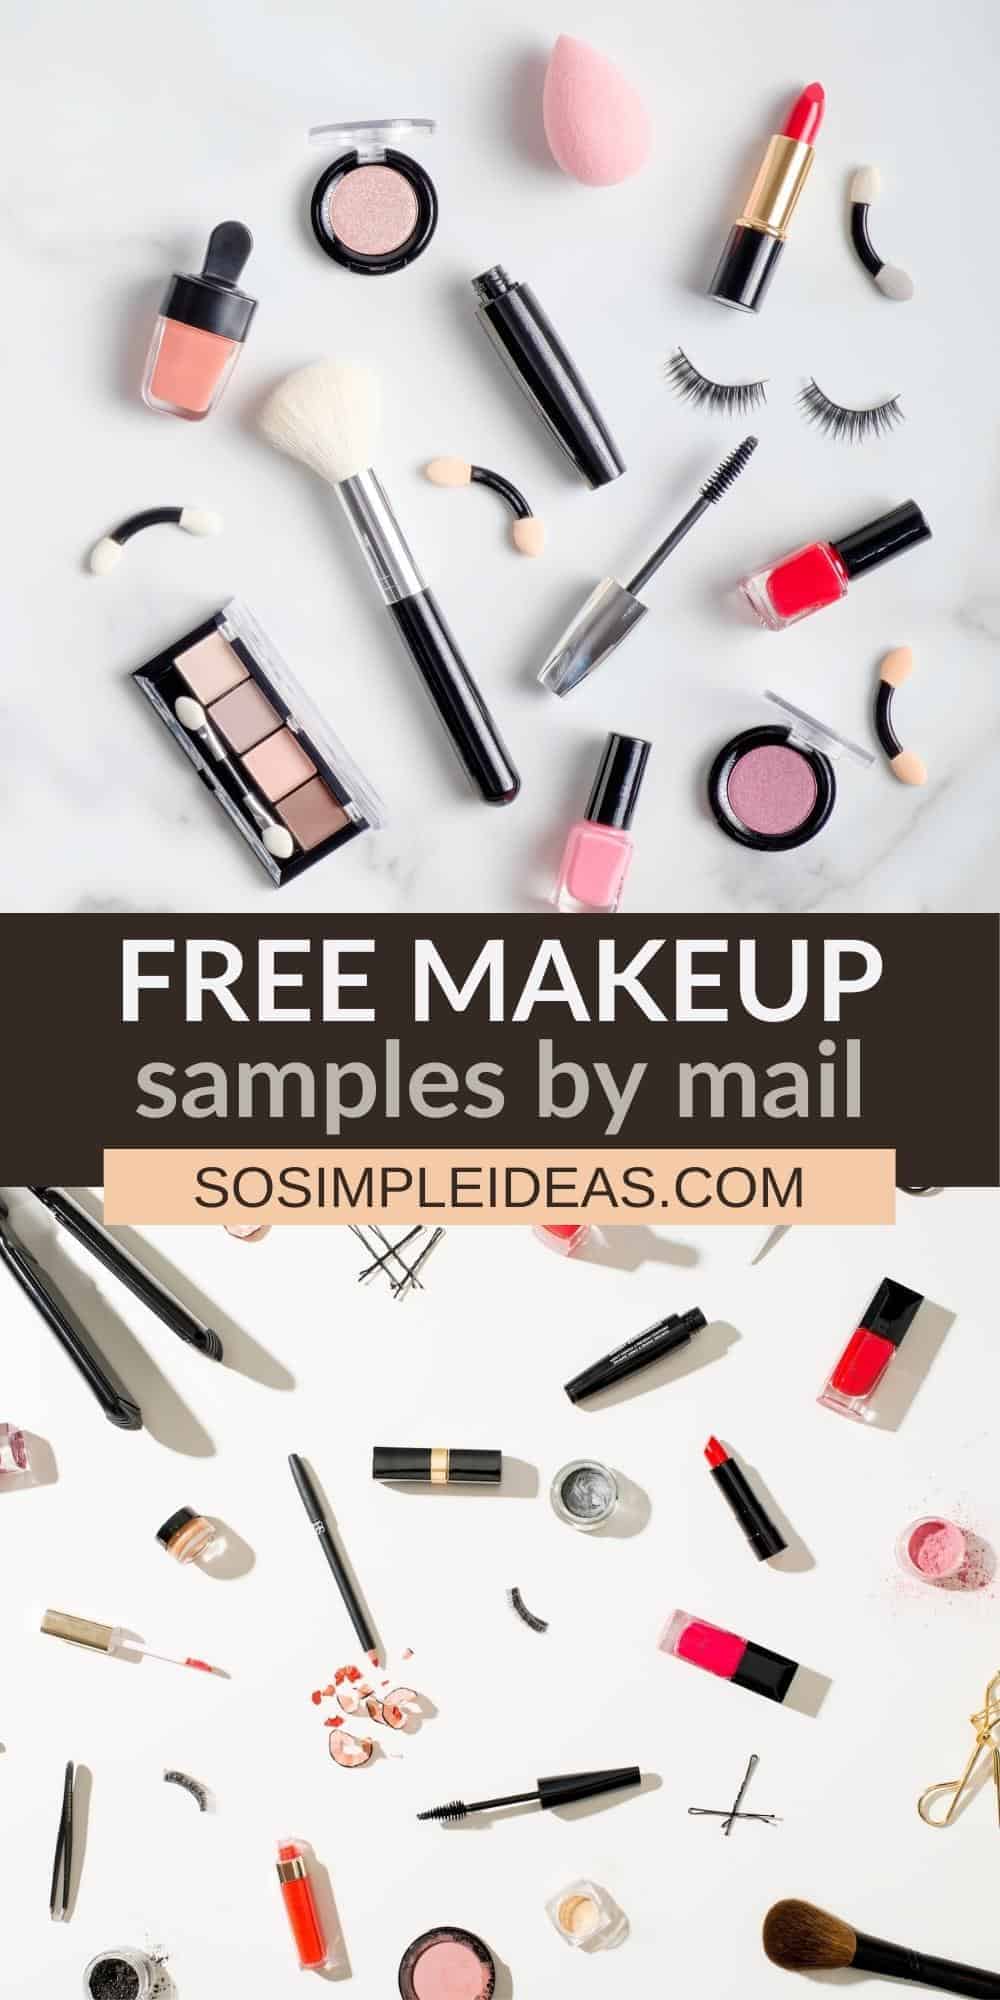 free makeup samples by mail pinterest image.